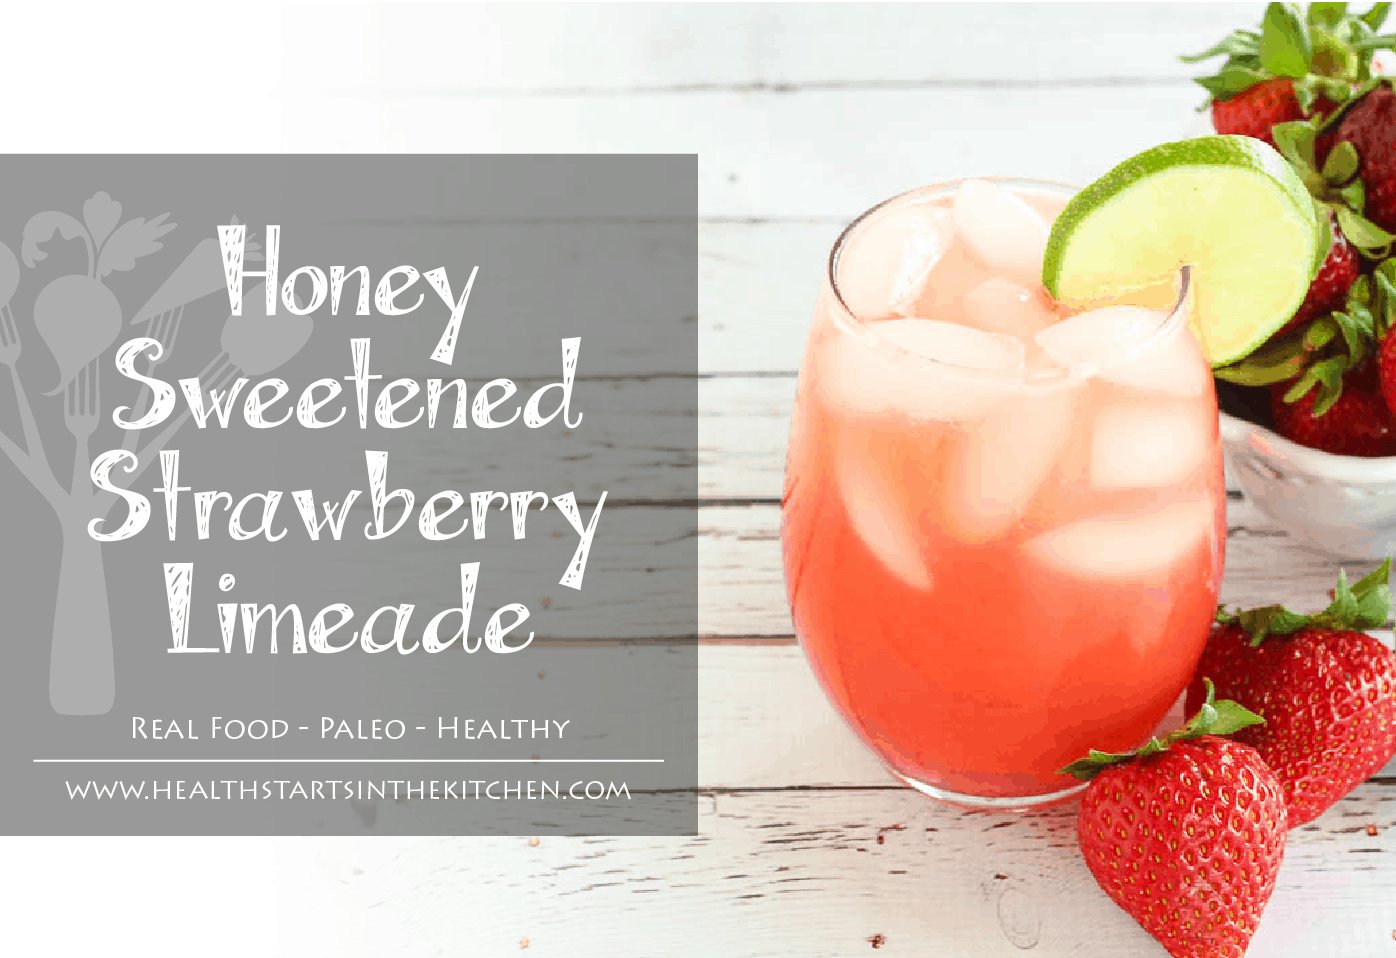 Paleo Honey Sweetened Strawberry Limeade - Health Starts in the Kitchen